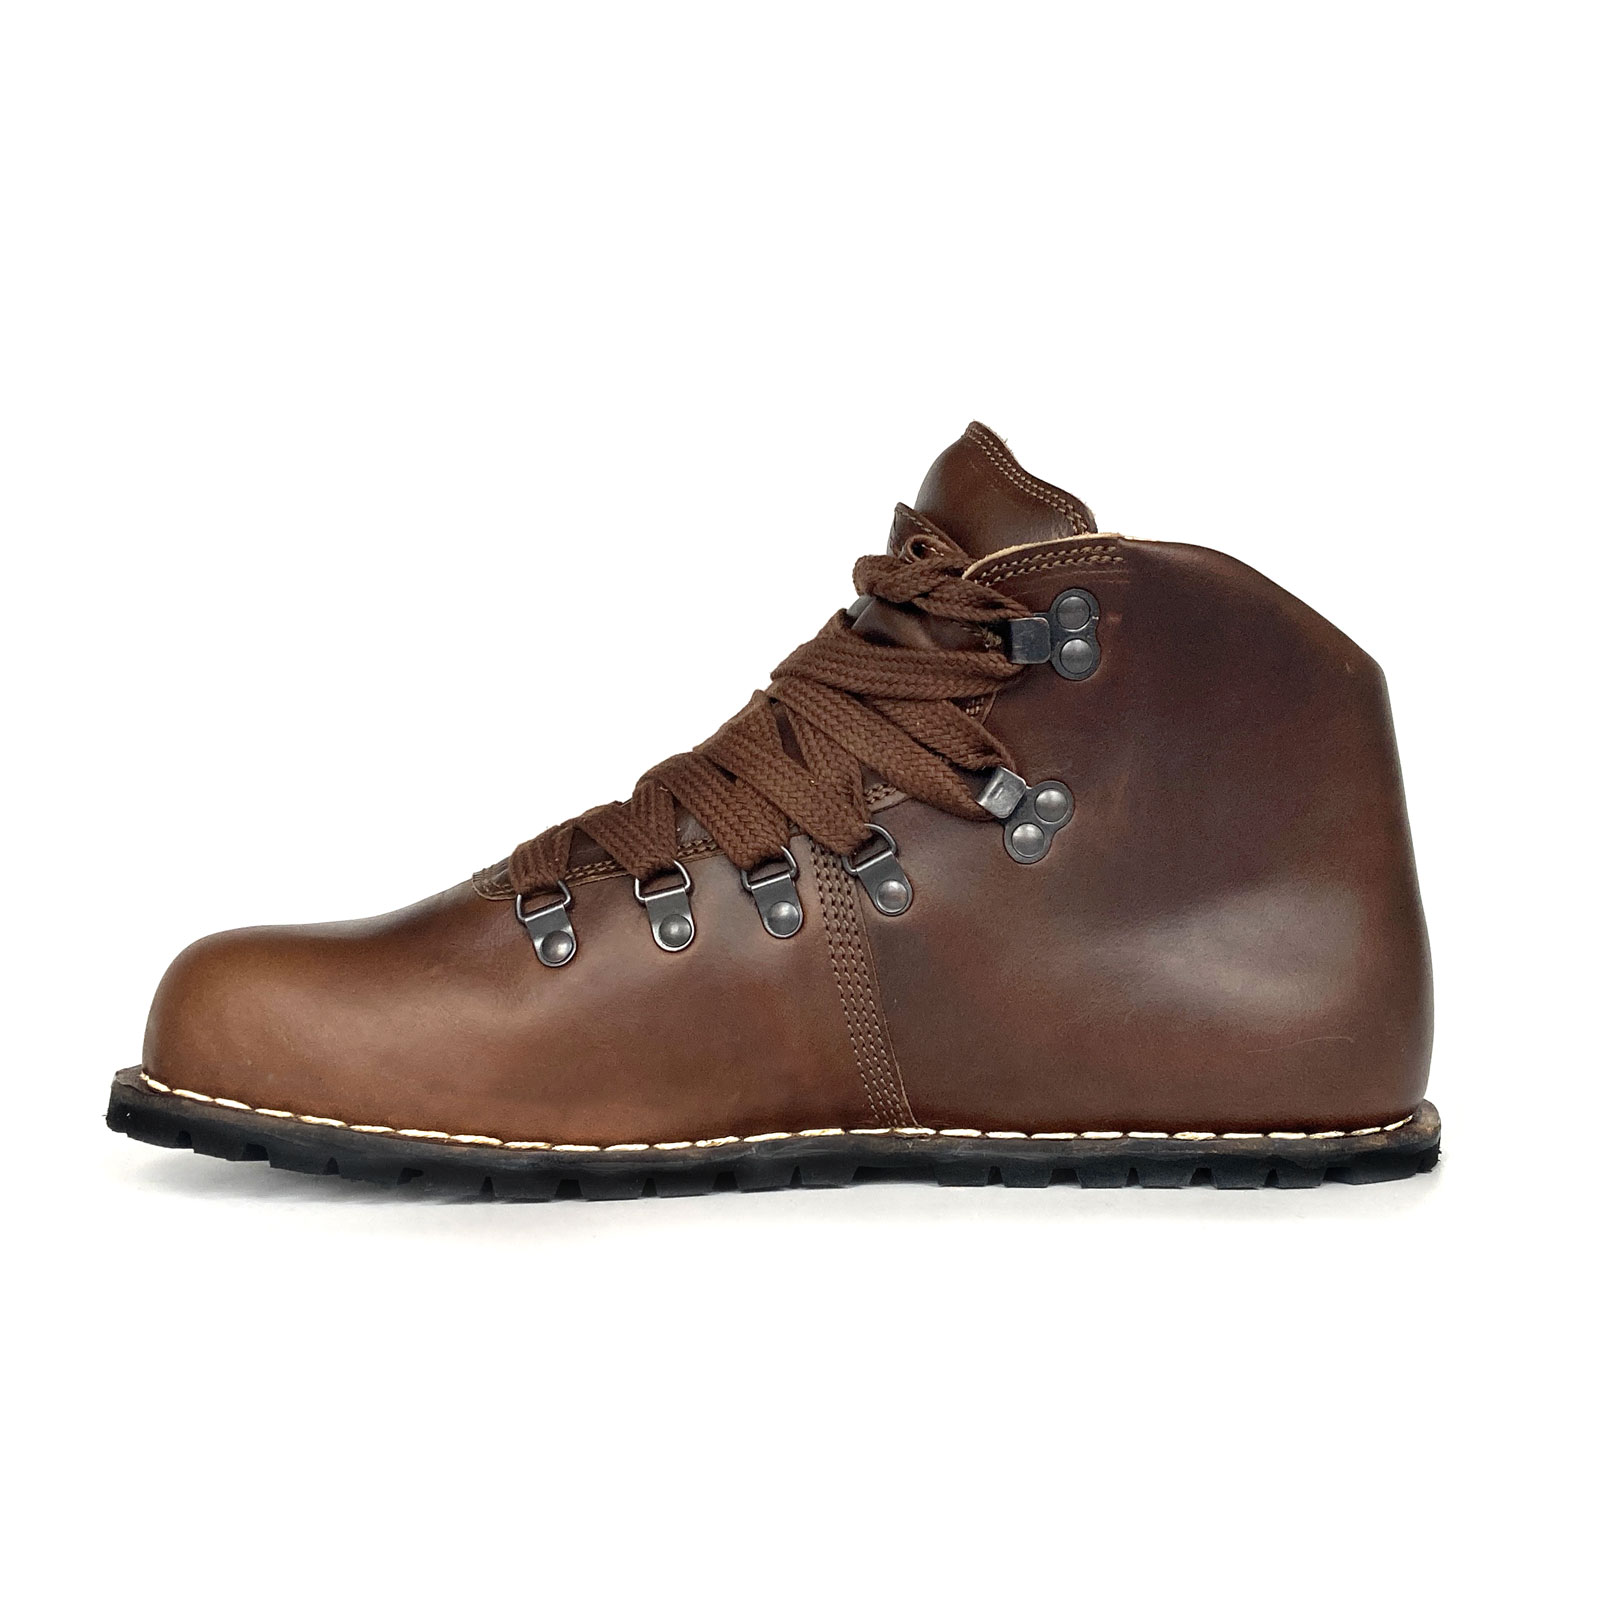 Buy > bespoke hiking boots > in stock